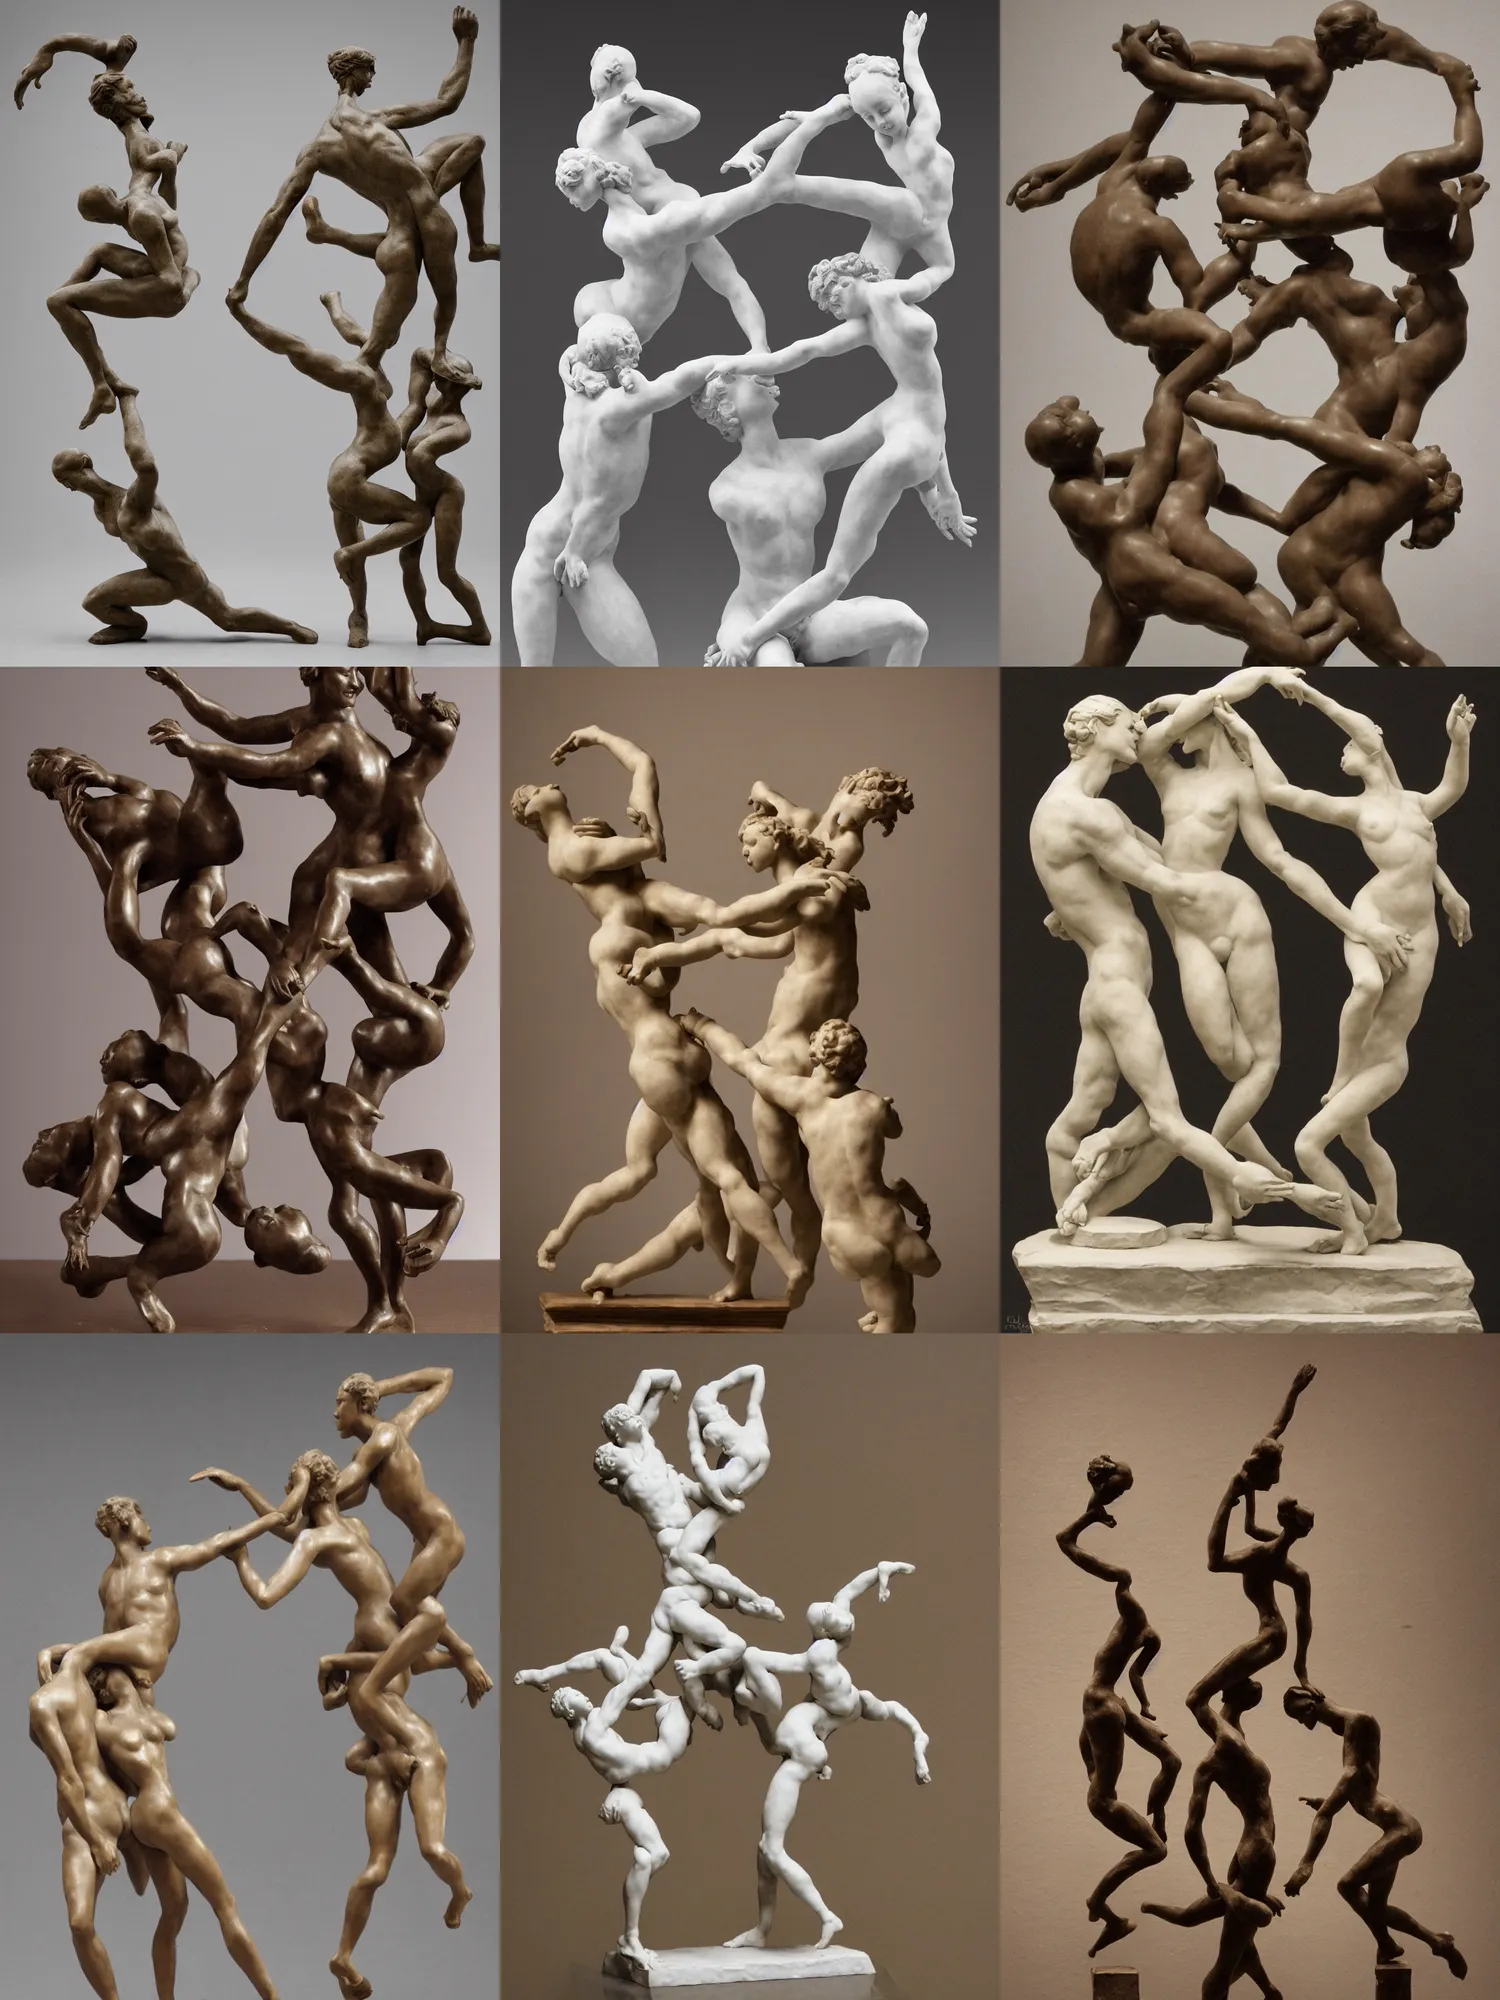 Prompt: a photo sculptures of a couples dancing by Michelangelo